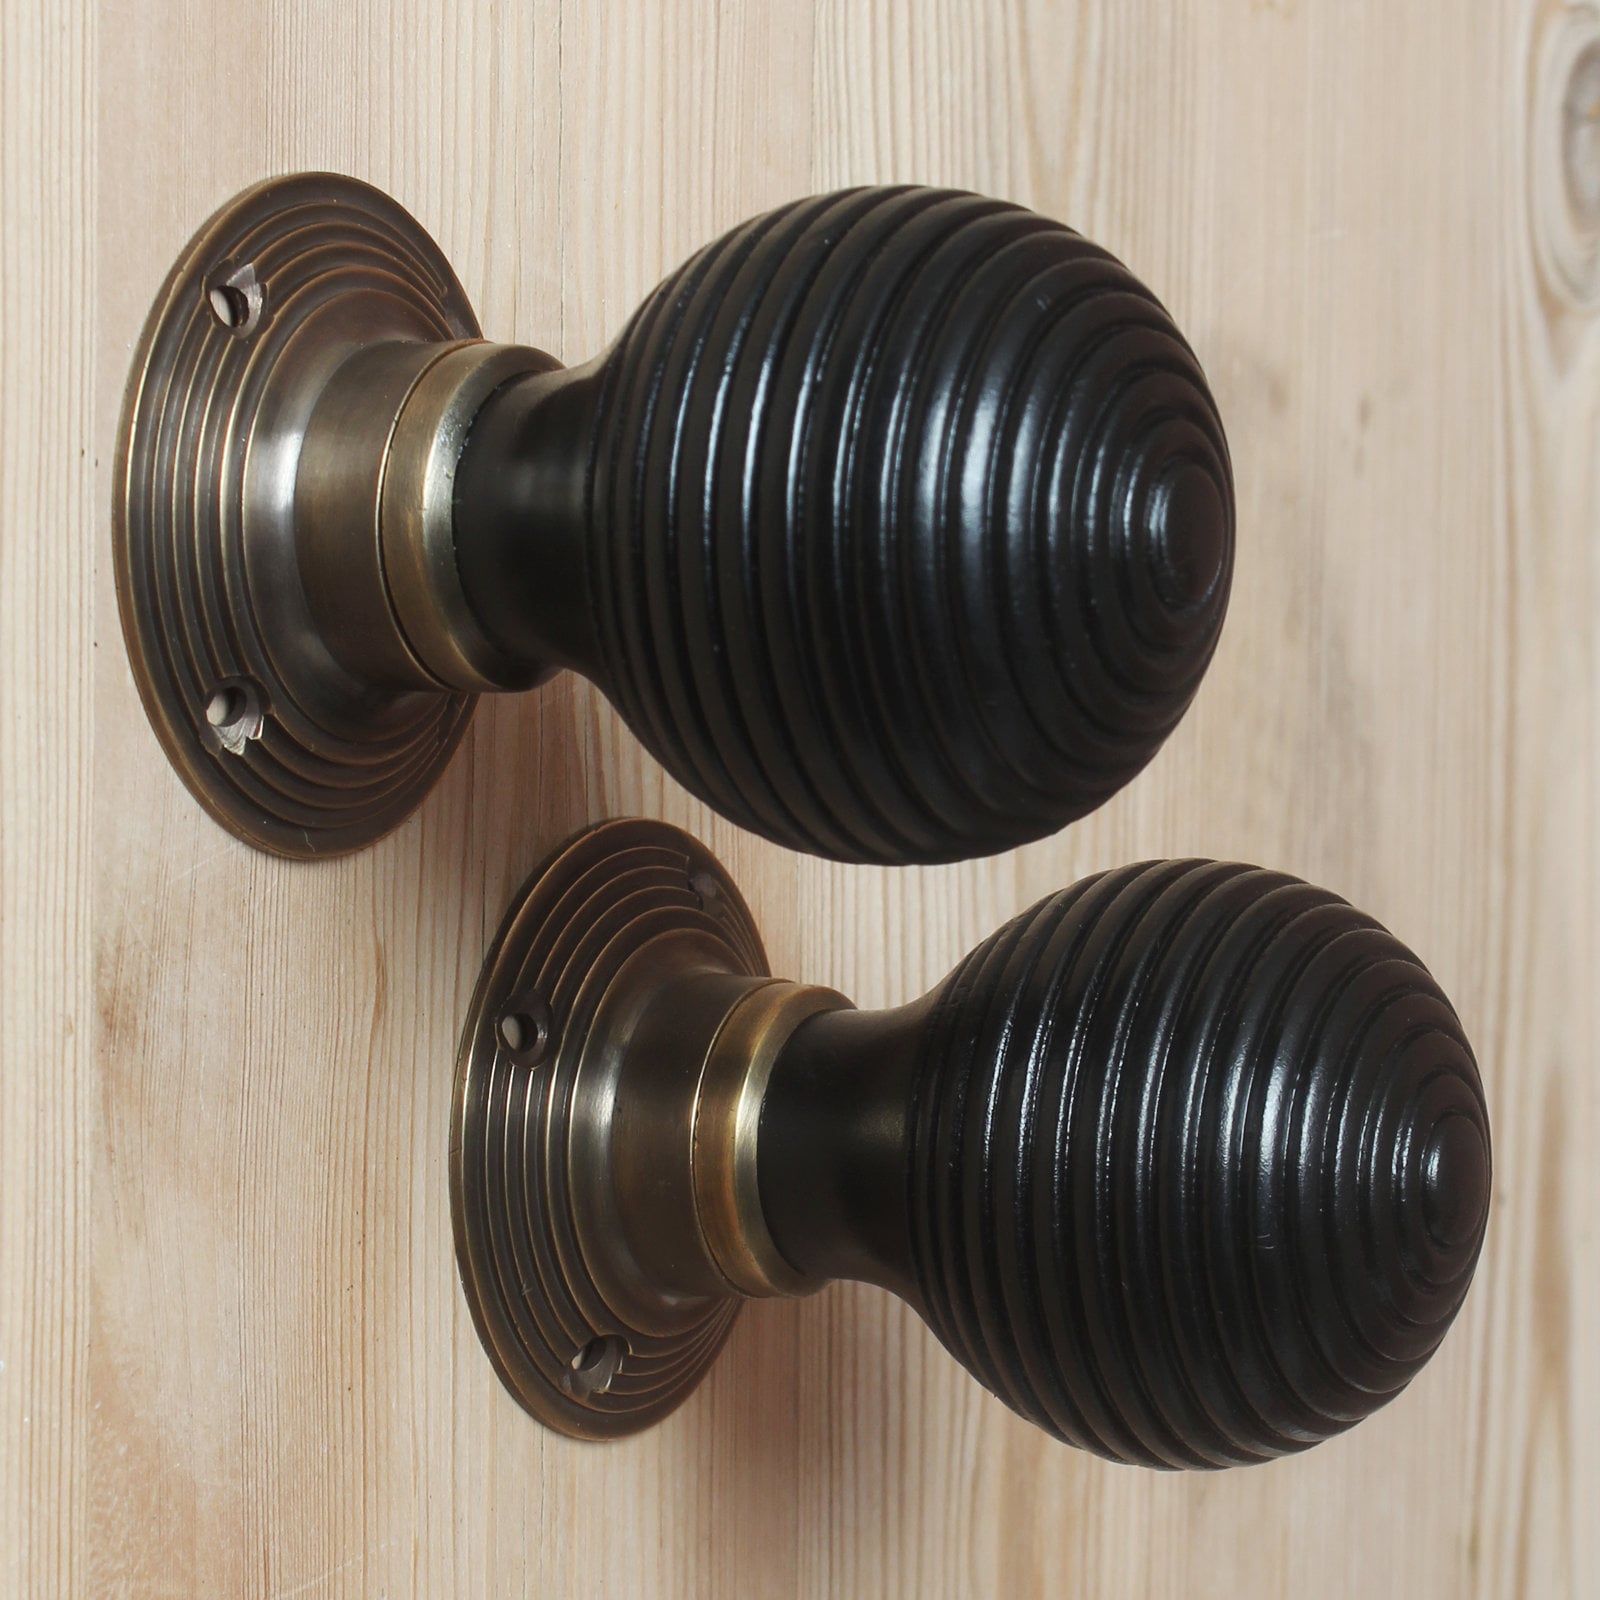 Set of Victorian Beehive/classic Rosewood/black Door Knob Handles Antique  Old Style Brass & Mortice Rim Lock Handles Quality Sold as Pair 